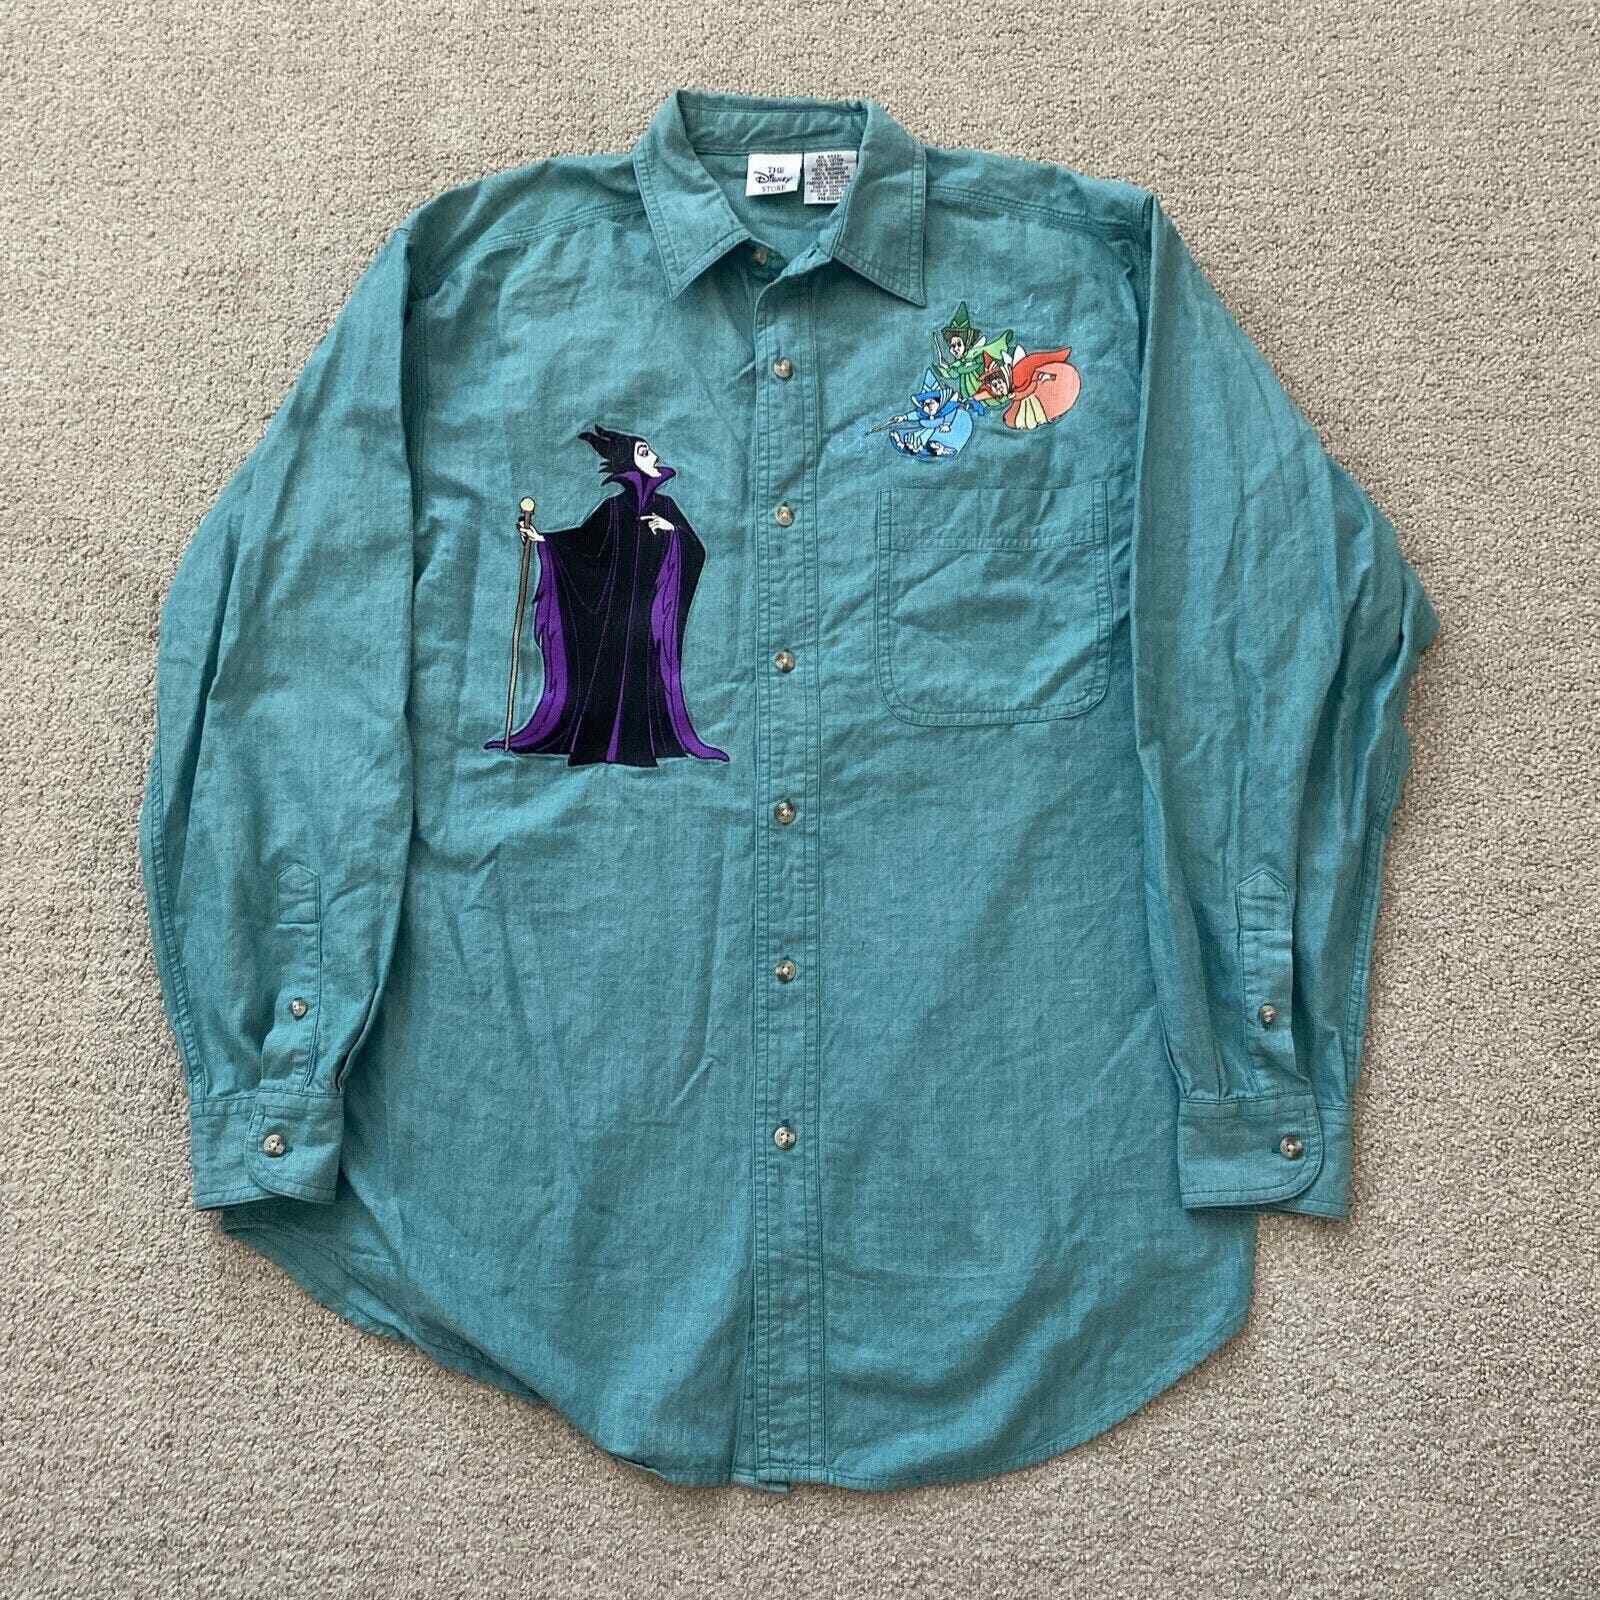 The Disney Store Men’s Sz M Long Sleeve Button Up Shirt Maleficent Embroidered